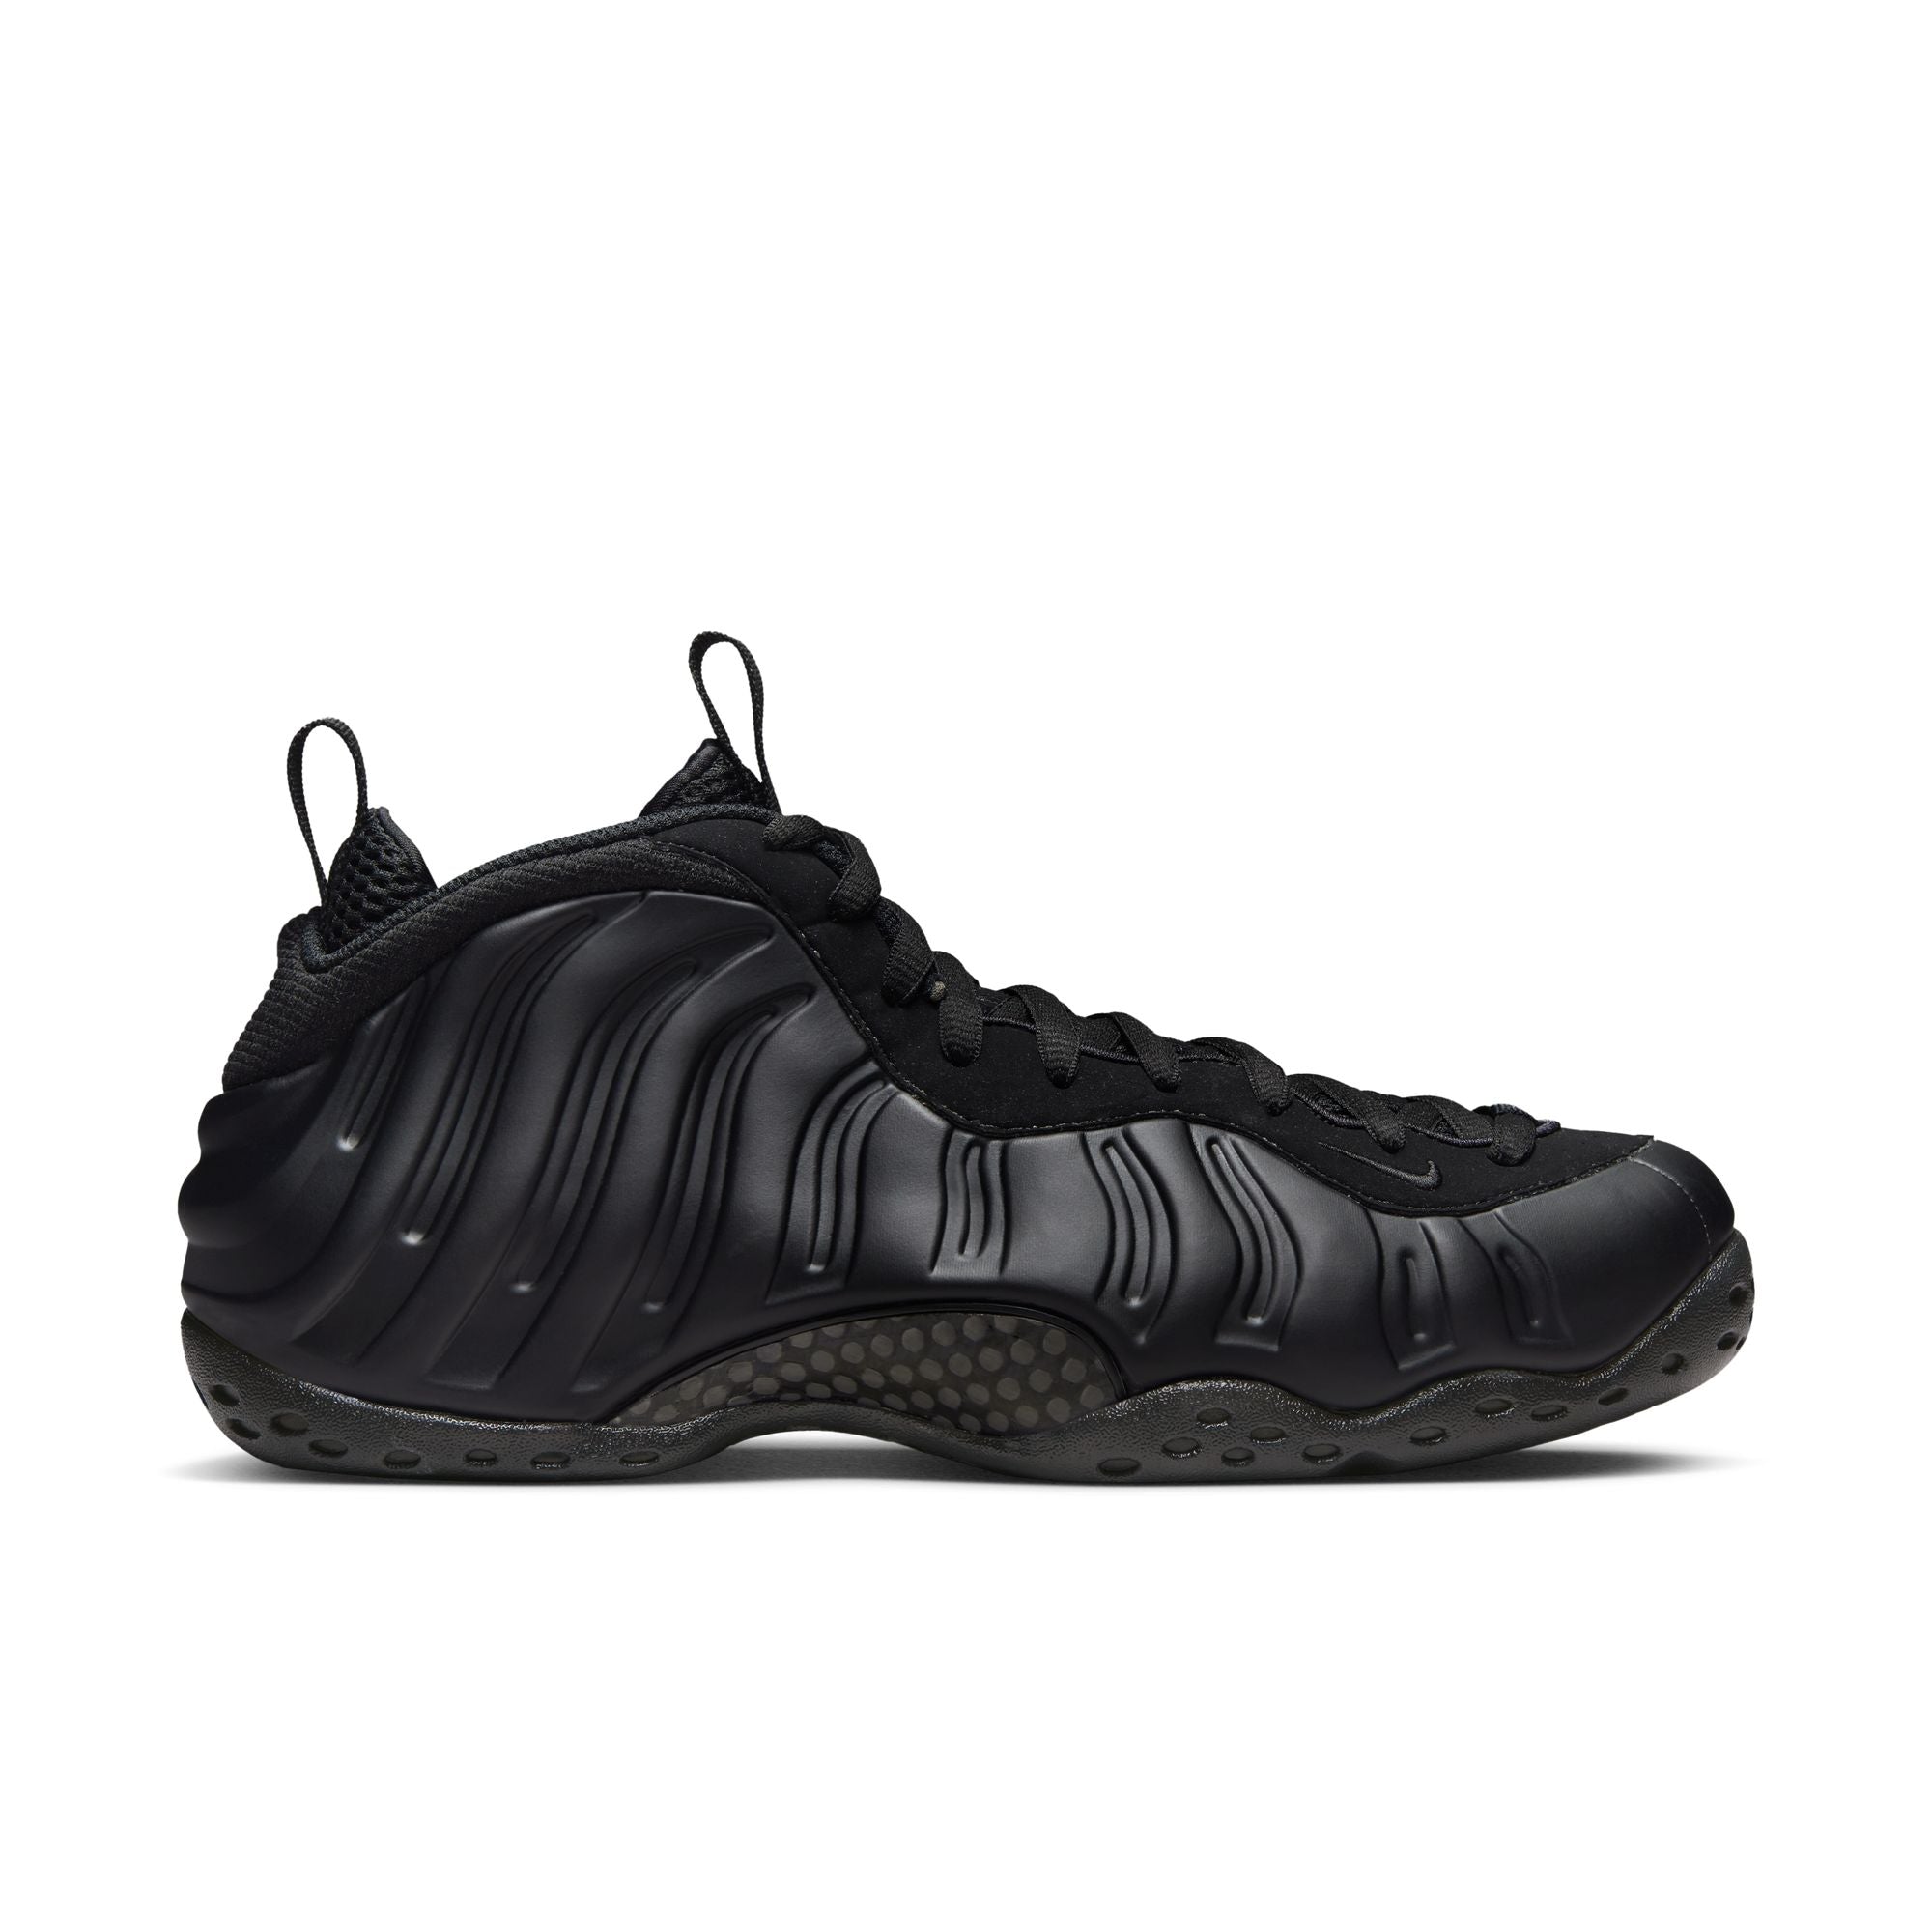 Nike Air Foamposite One 'Anthracite'